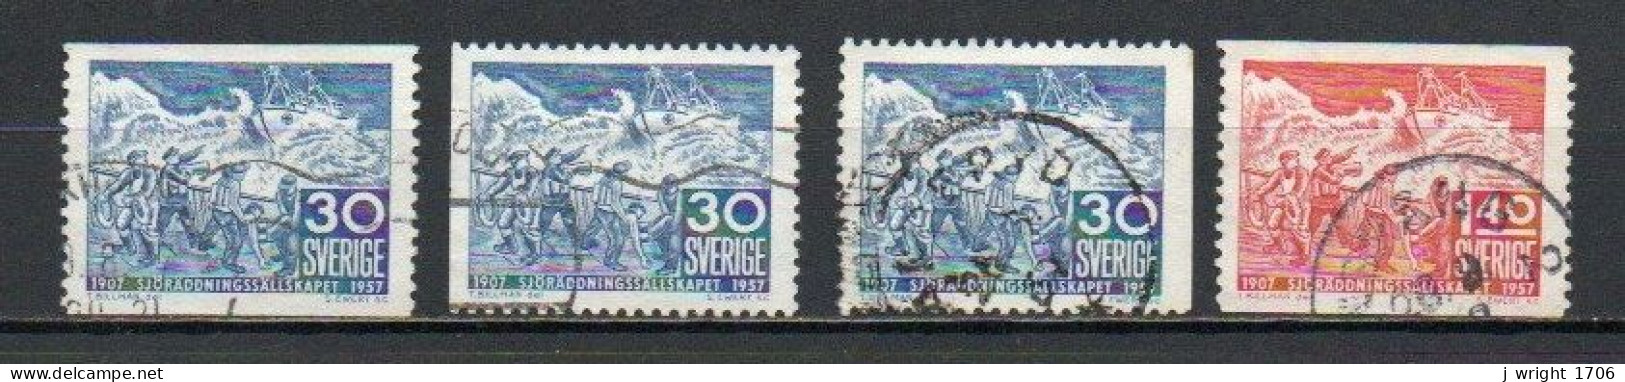 Sweden, 1957, Life Saving Society 50th Anniv, Set, USED - Used Stamps